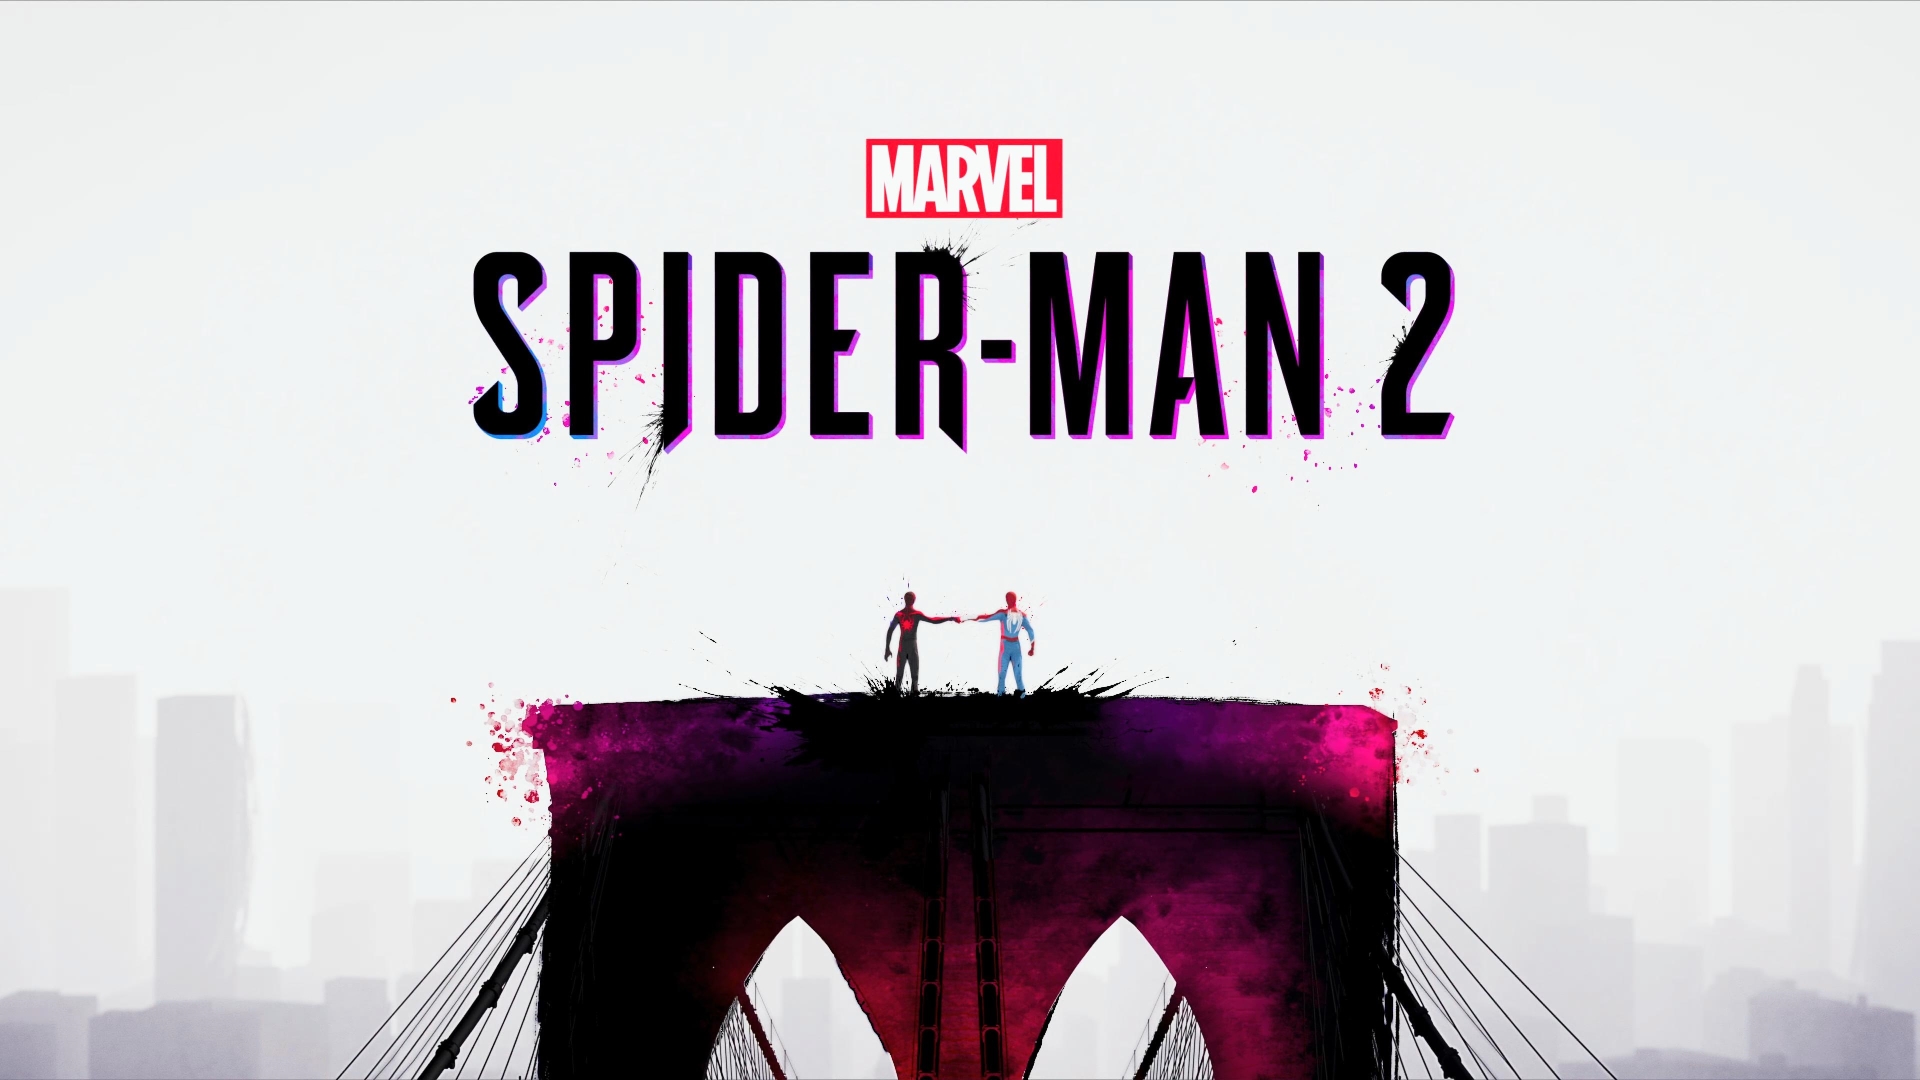 IGN - It's safe to call this another thrilling Spider-Man adventure that  delivers Insomniac's best tale yet, and despite its open world falling  short, it's a reliably fun superhero power trip.. Link